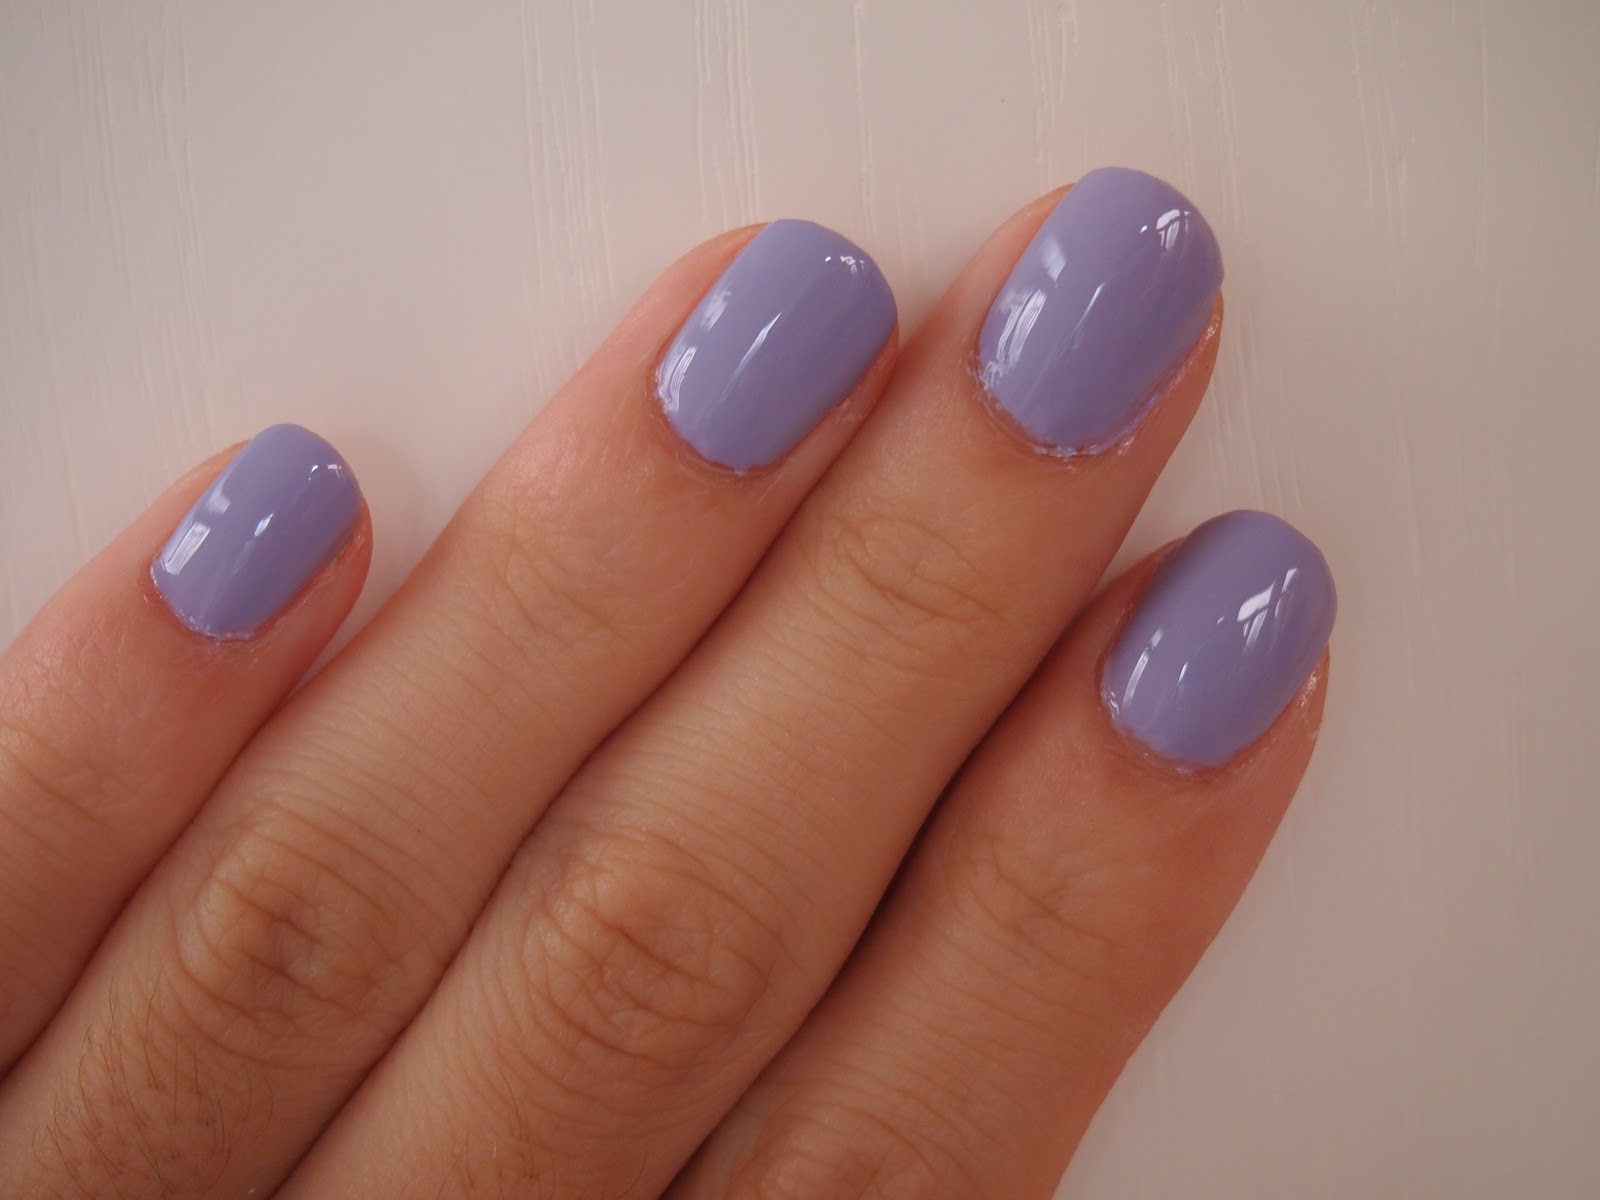 2. Essie Nail Polish in "Lilacism" - wide 3